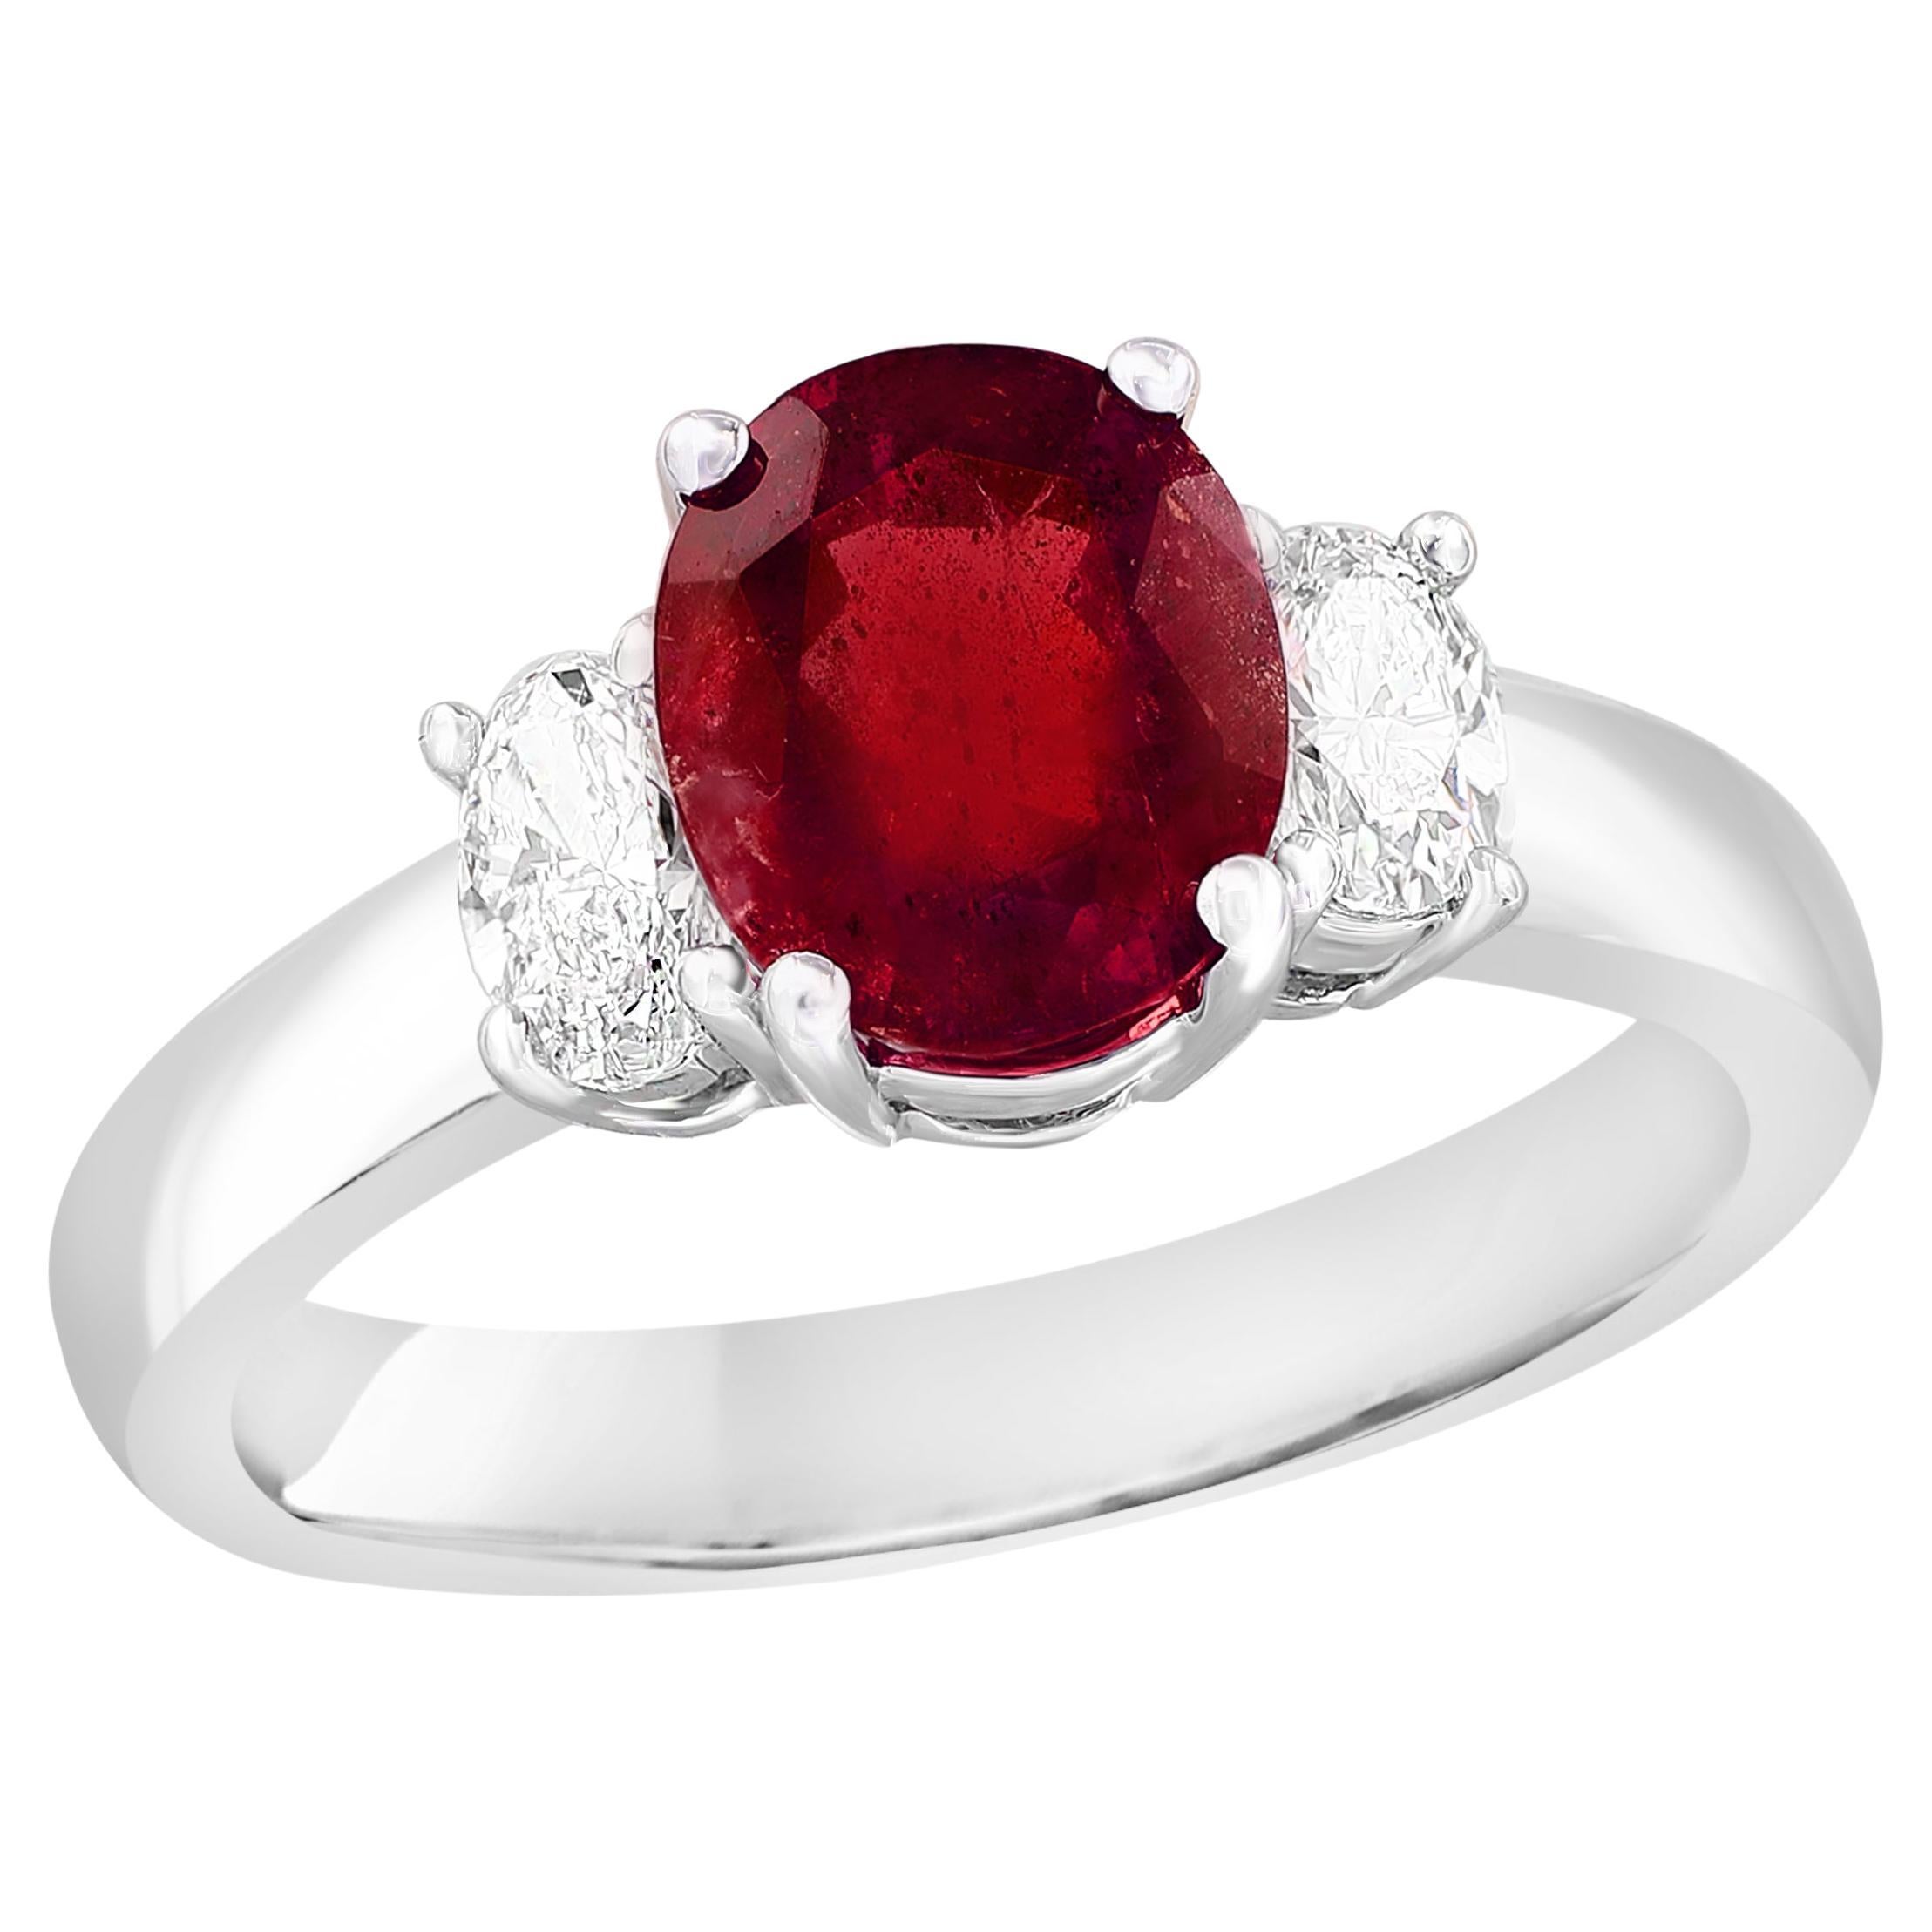 1.15 Carat Oval Cut Ruby & Diamond 3 Stone Engagement Ring in 18k White Gold